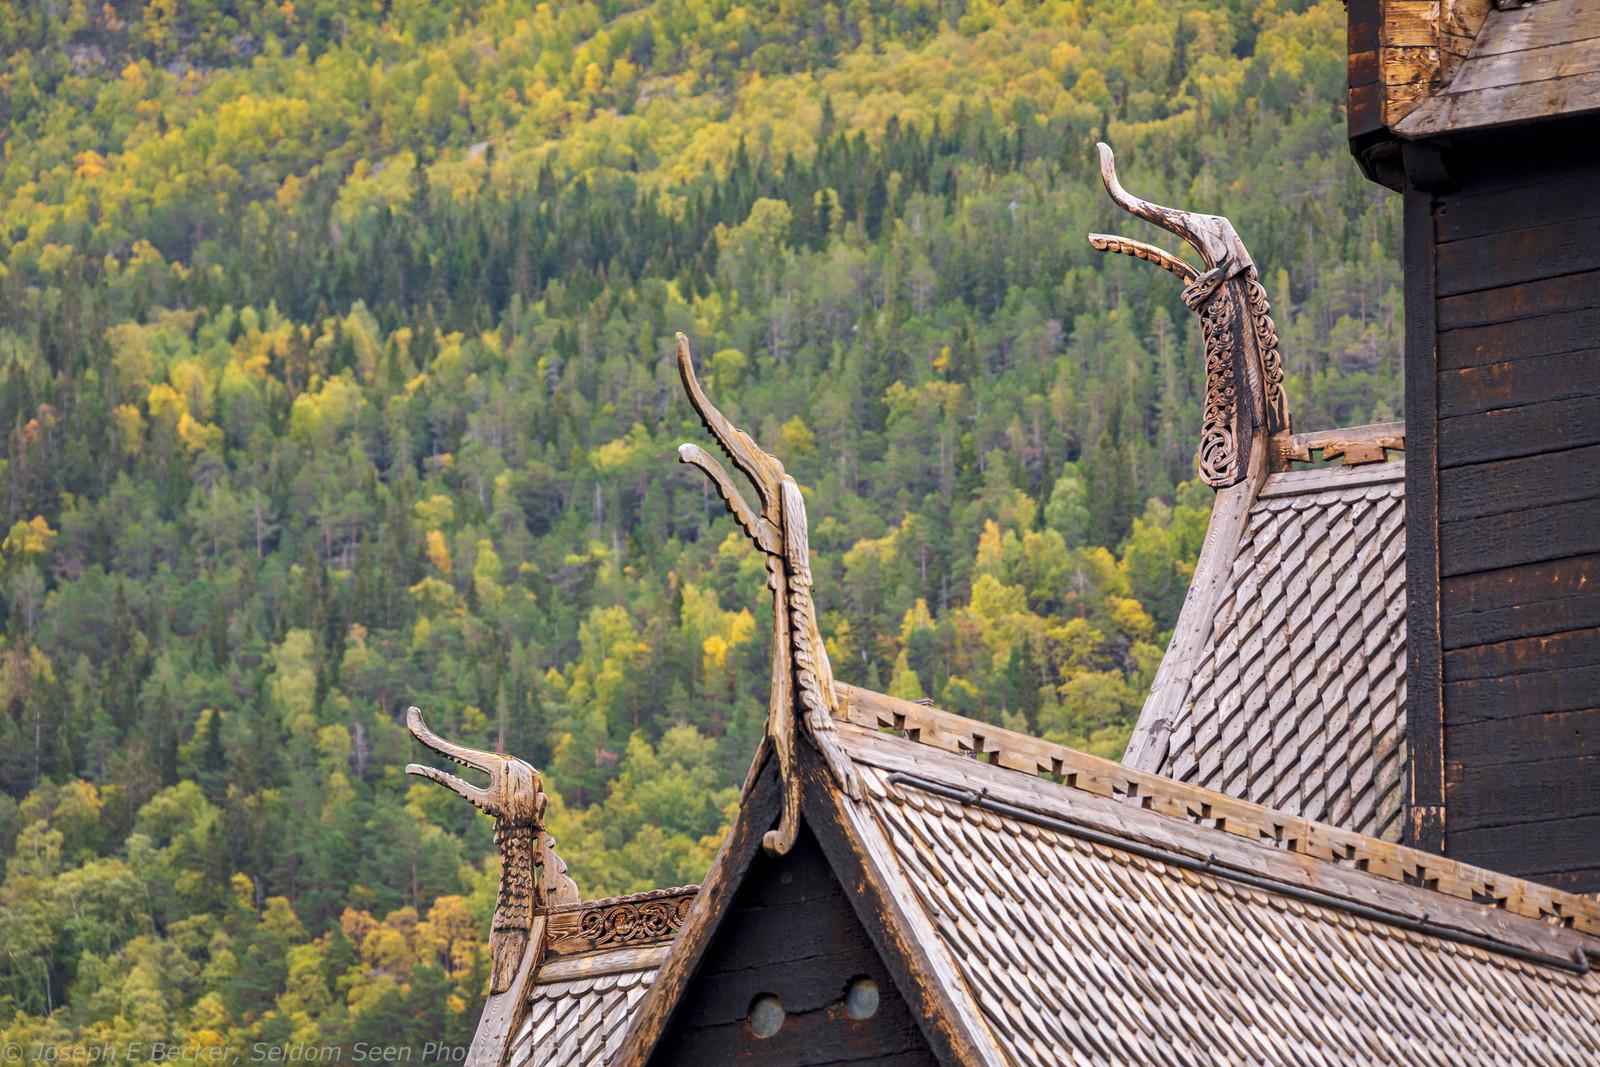 Image of Lom Stave Church - Exterior by Joe Becker